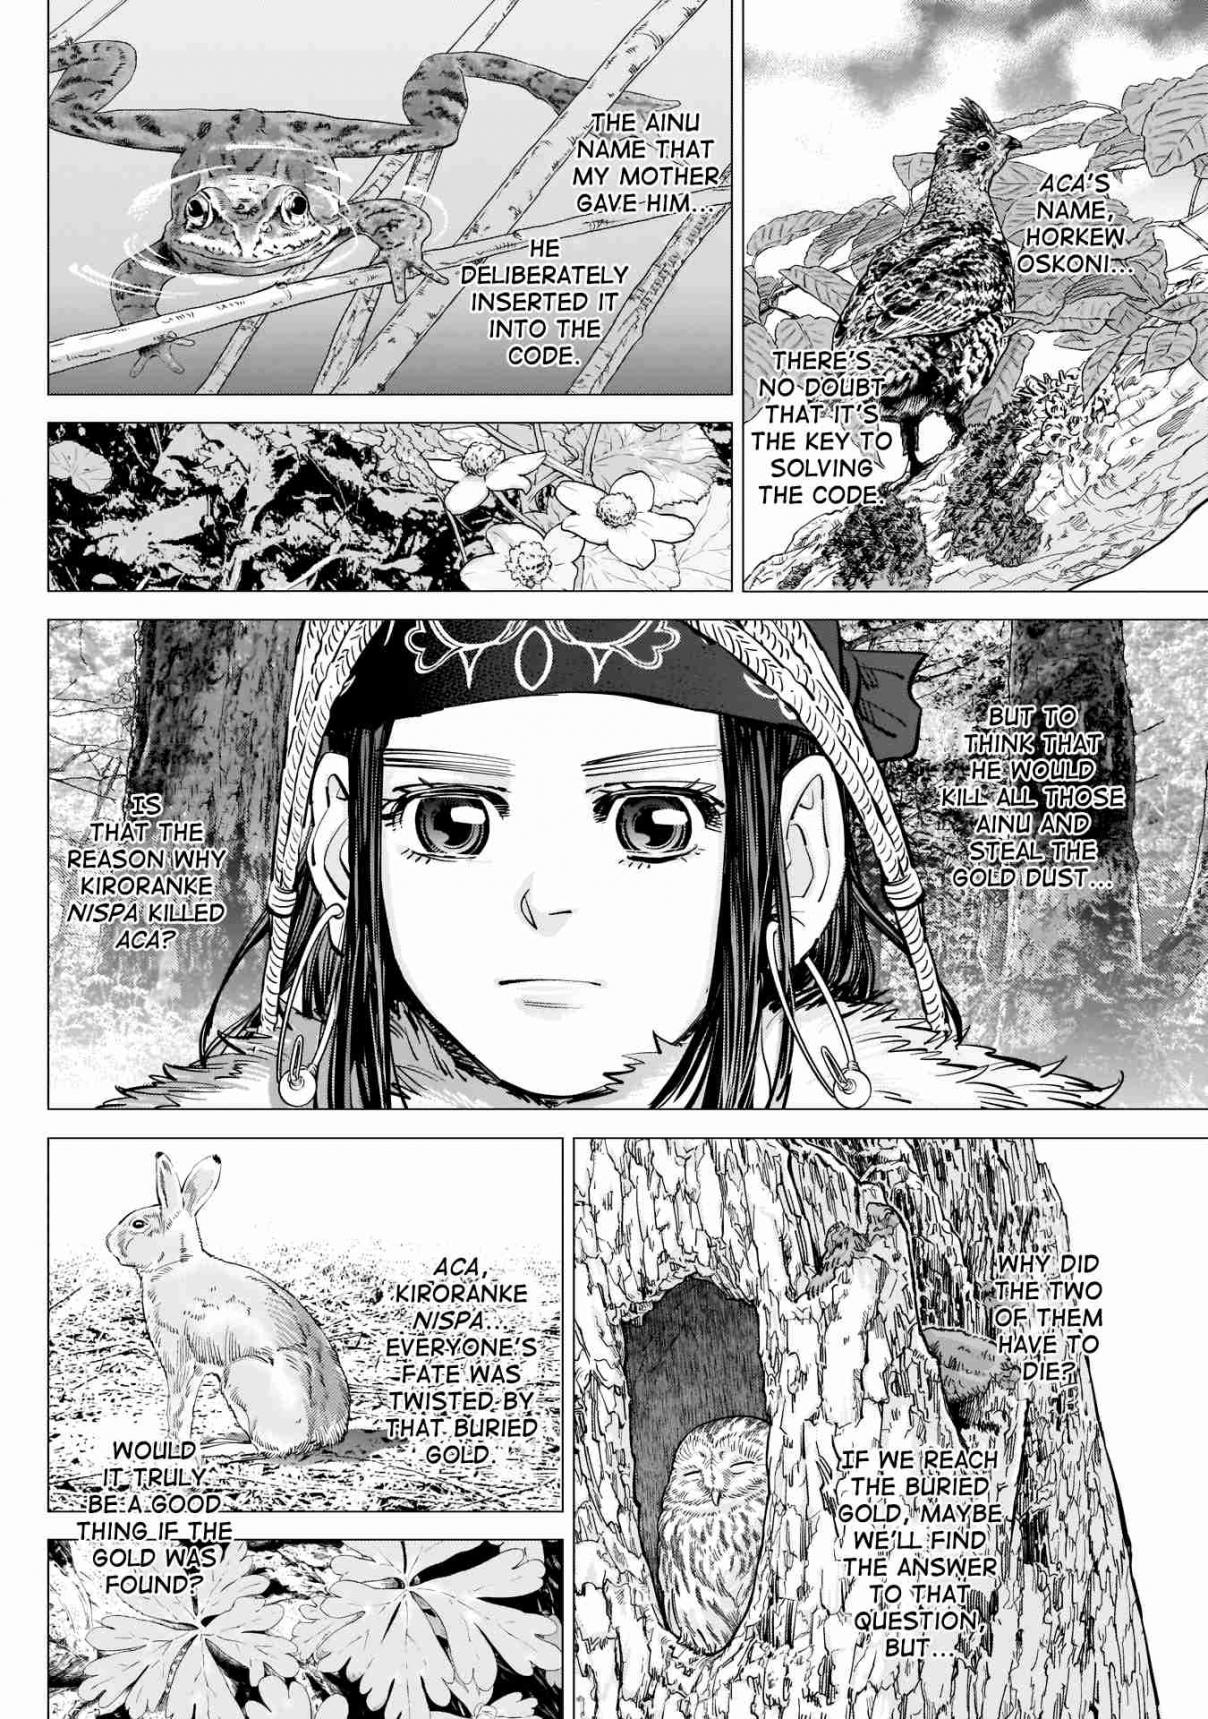 Golden Kamuy Ch. 241 The Kamuy That Vanished